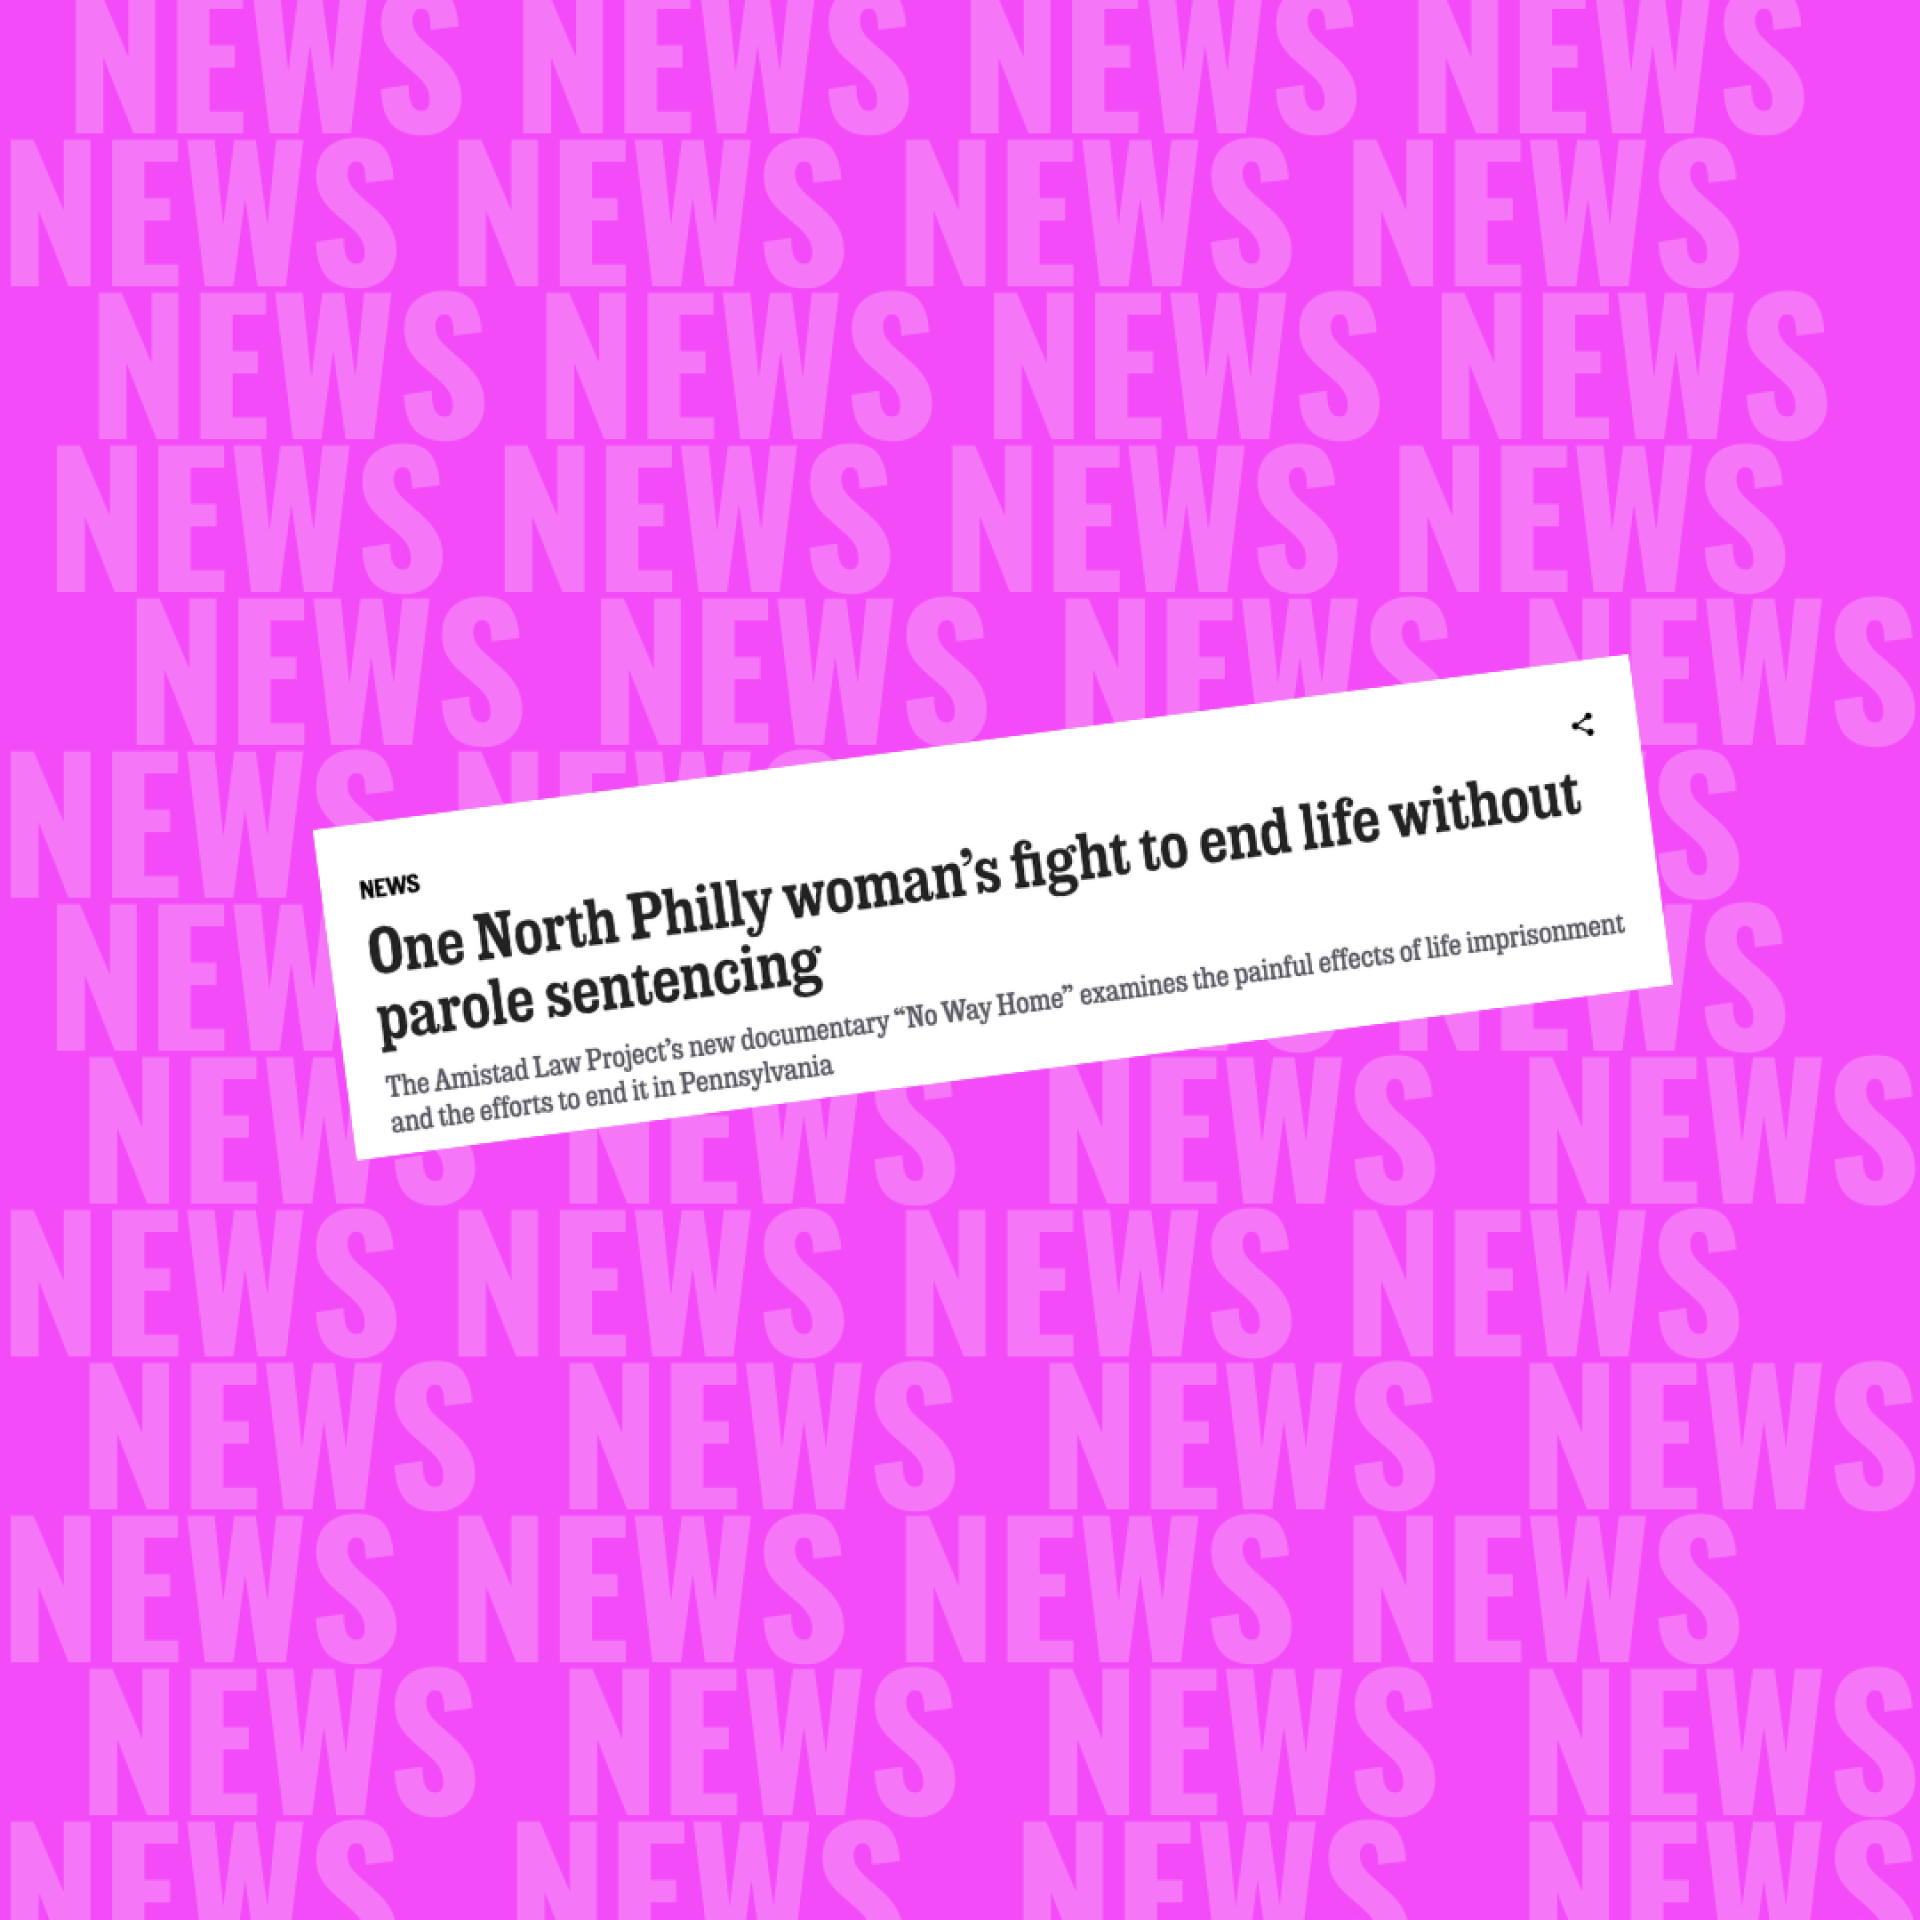 a graphic shows the headline 'One North Philly woman fight to end life without parole sentencing